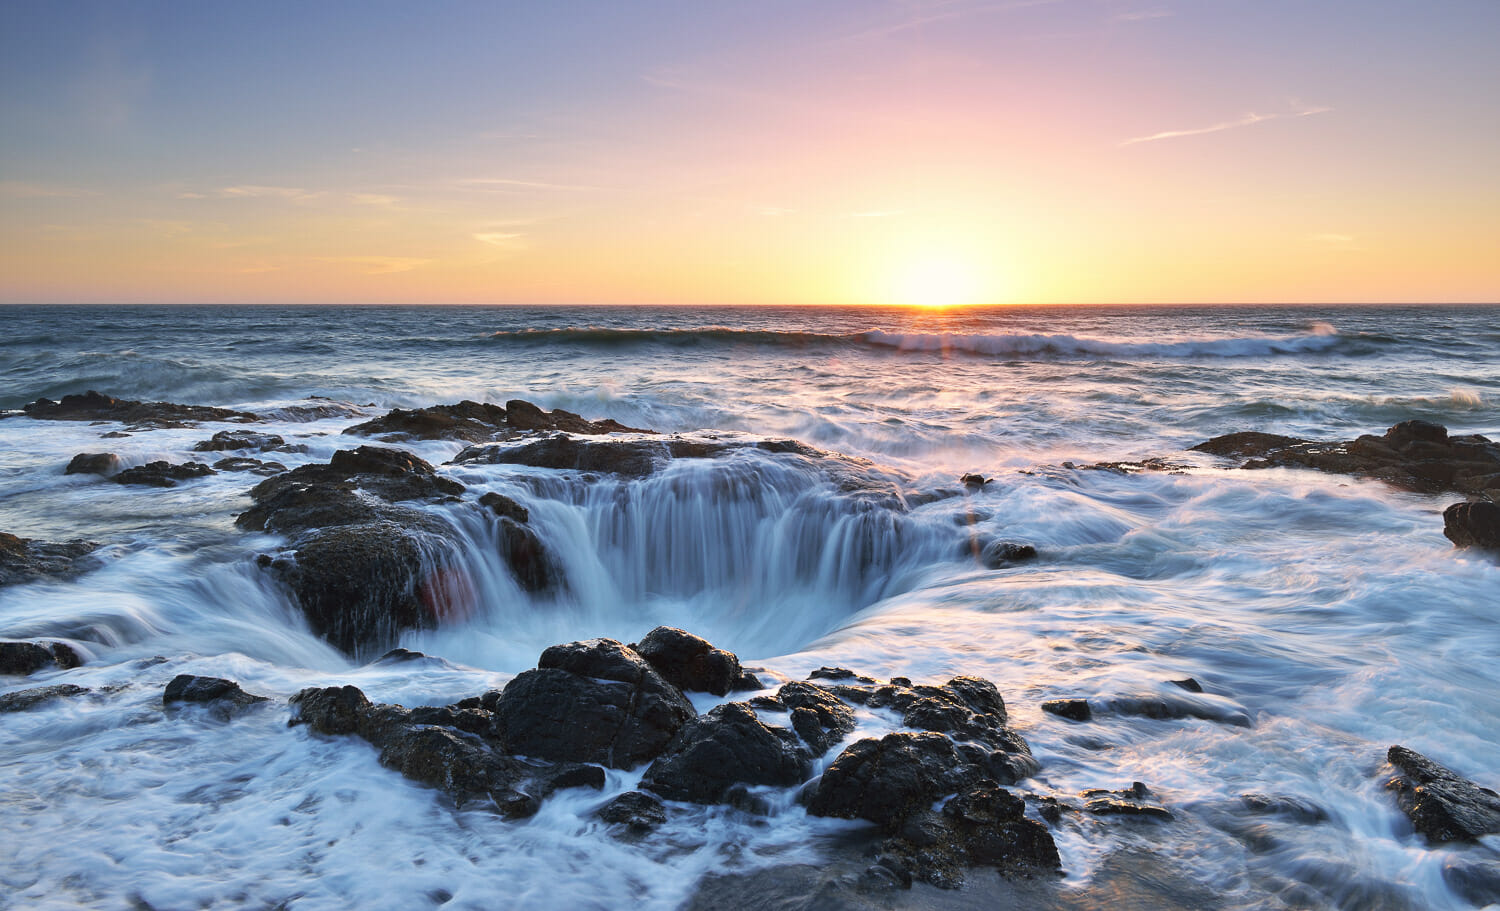 Thor's Well on the Oregon coast with ocean waves rushing into the rocks